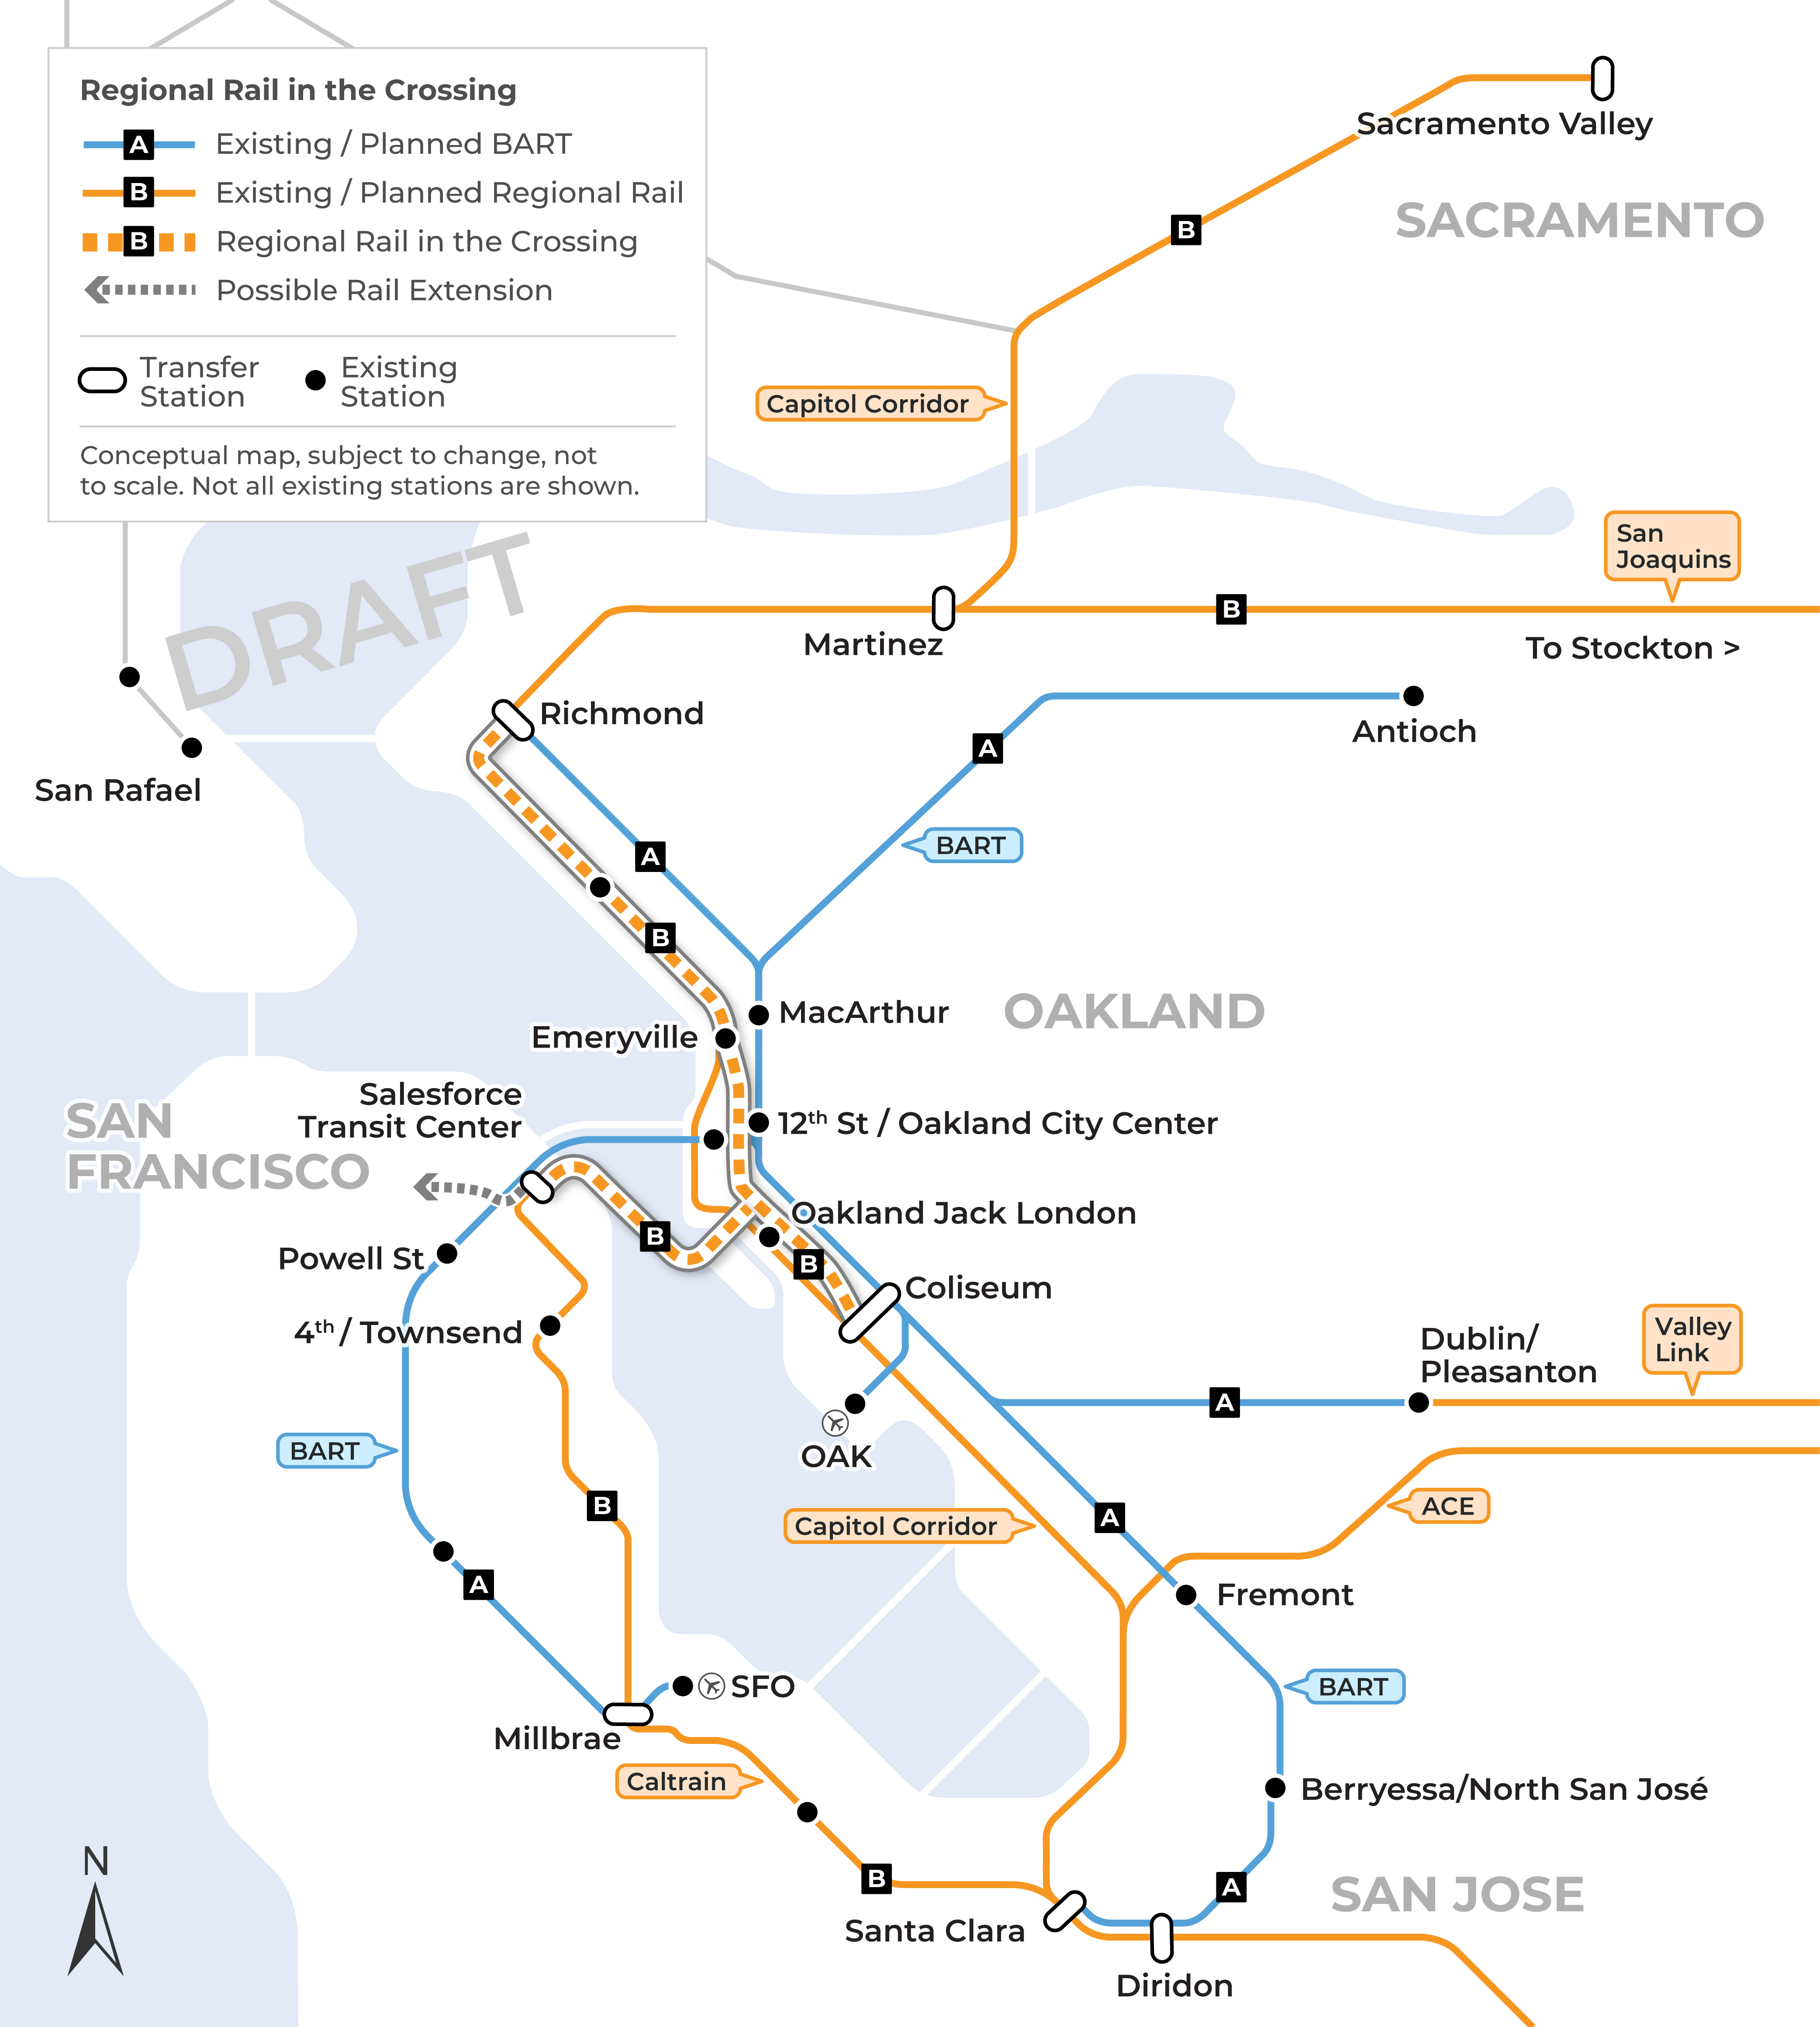 A map of the Regional Rail service network in Northern California. Regional Rail in the Crossing map legend includes existing and planned BART routes, and existing and planned Regional Rail routes. The Regional Rail in the crossing goes from Richmond to Coliseum with a connector from Oakland Jack London to the Salesforce Transit Center. The legend also includes possible rail extension routes and both transfer stations and existing stations. Not all existing stations are shown.